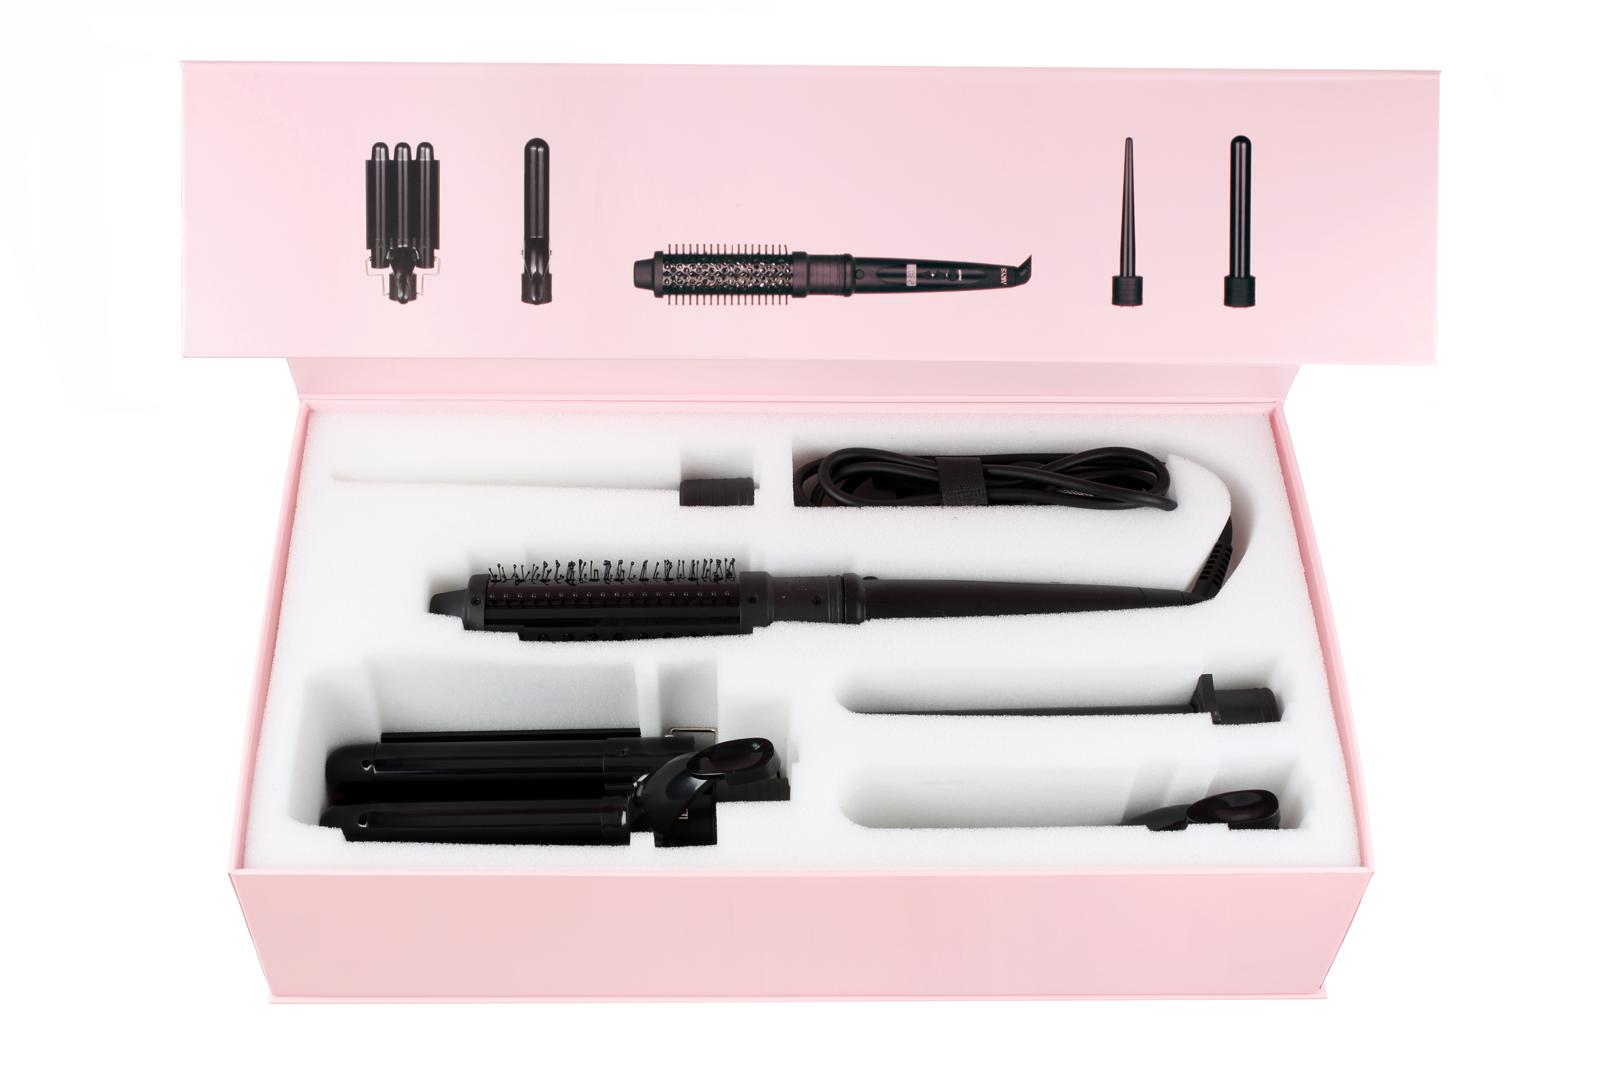 Wave Babe - Airys Hair - 5 in 1 hair styler - 5 in 1 styler - wavy talk - hair curler - curling tong - thermal brush - bouncy blowdry brush - mermaid waver - beach wave - interchangeable head - hair styling attachments - curling wand - blowout brush